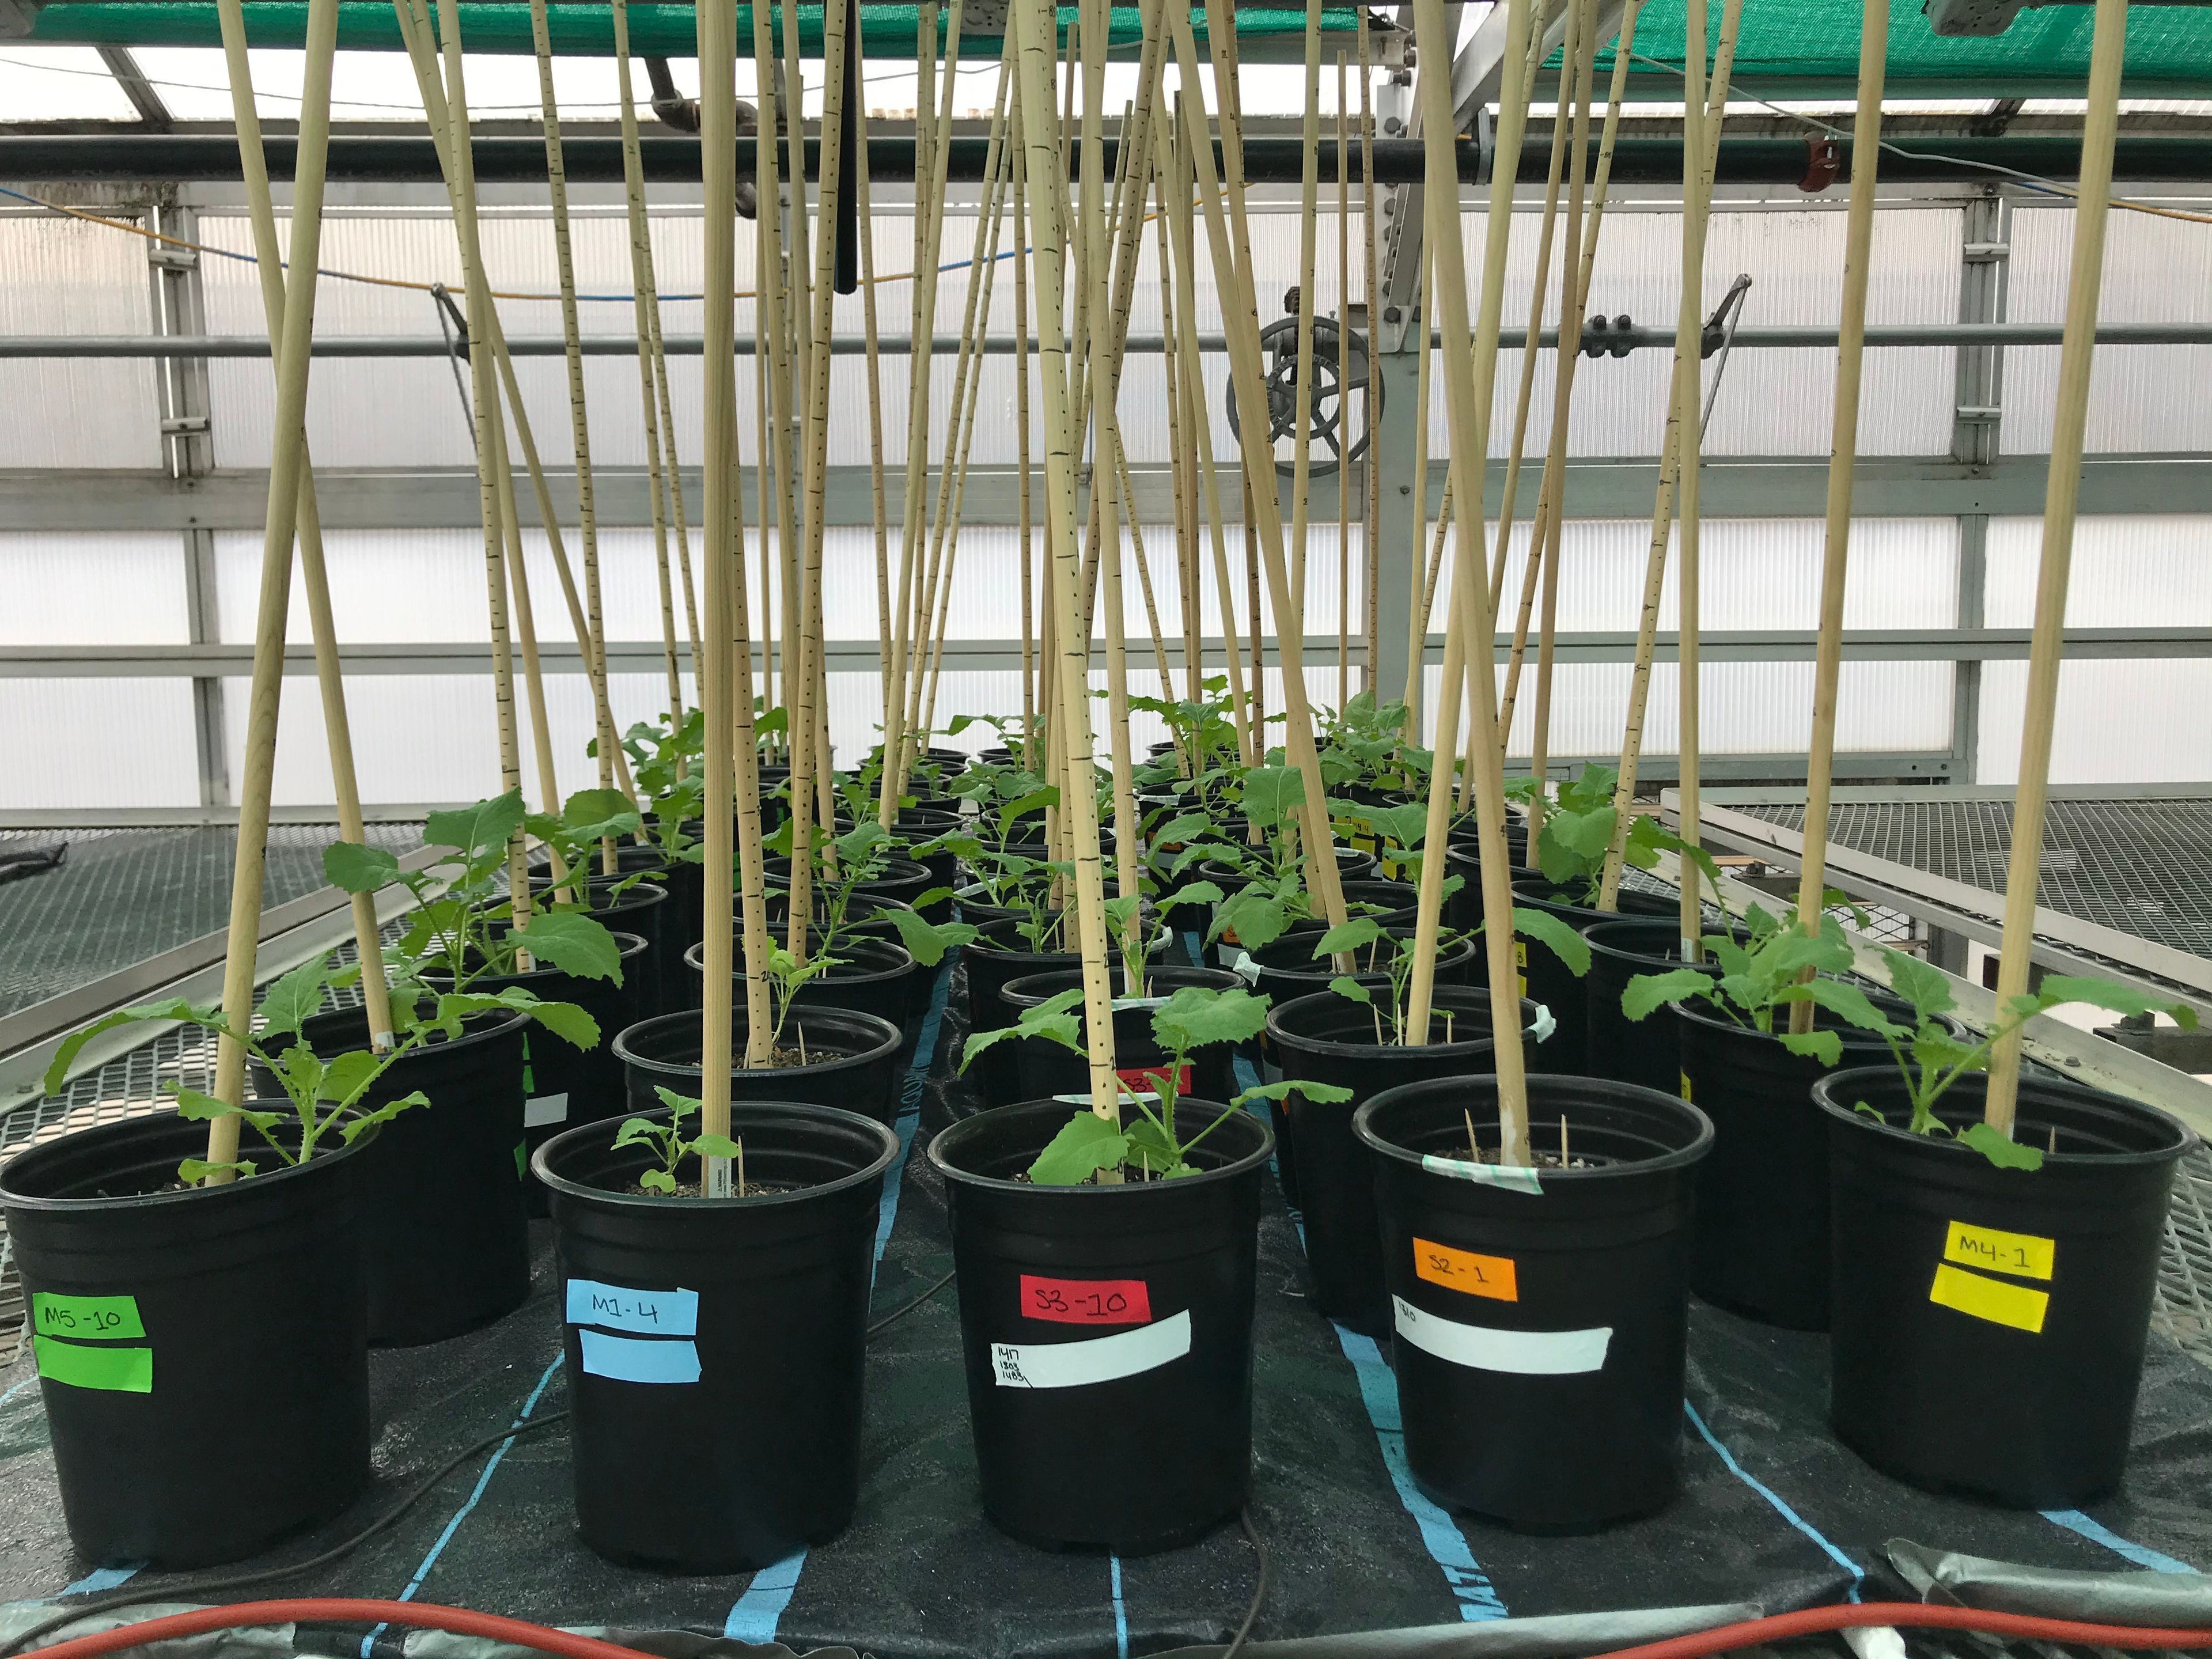 Five mustard plants grown in a greenhouse inoculated with microbes from around Colorado